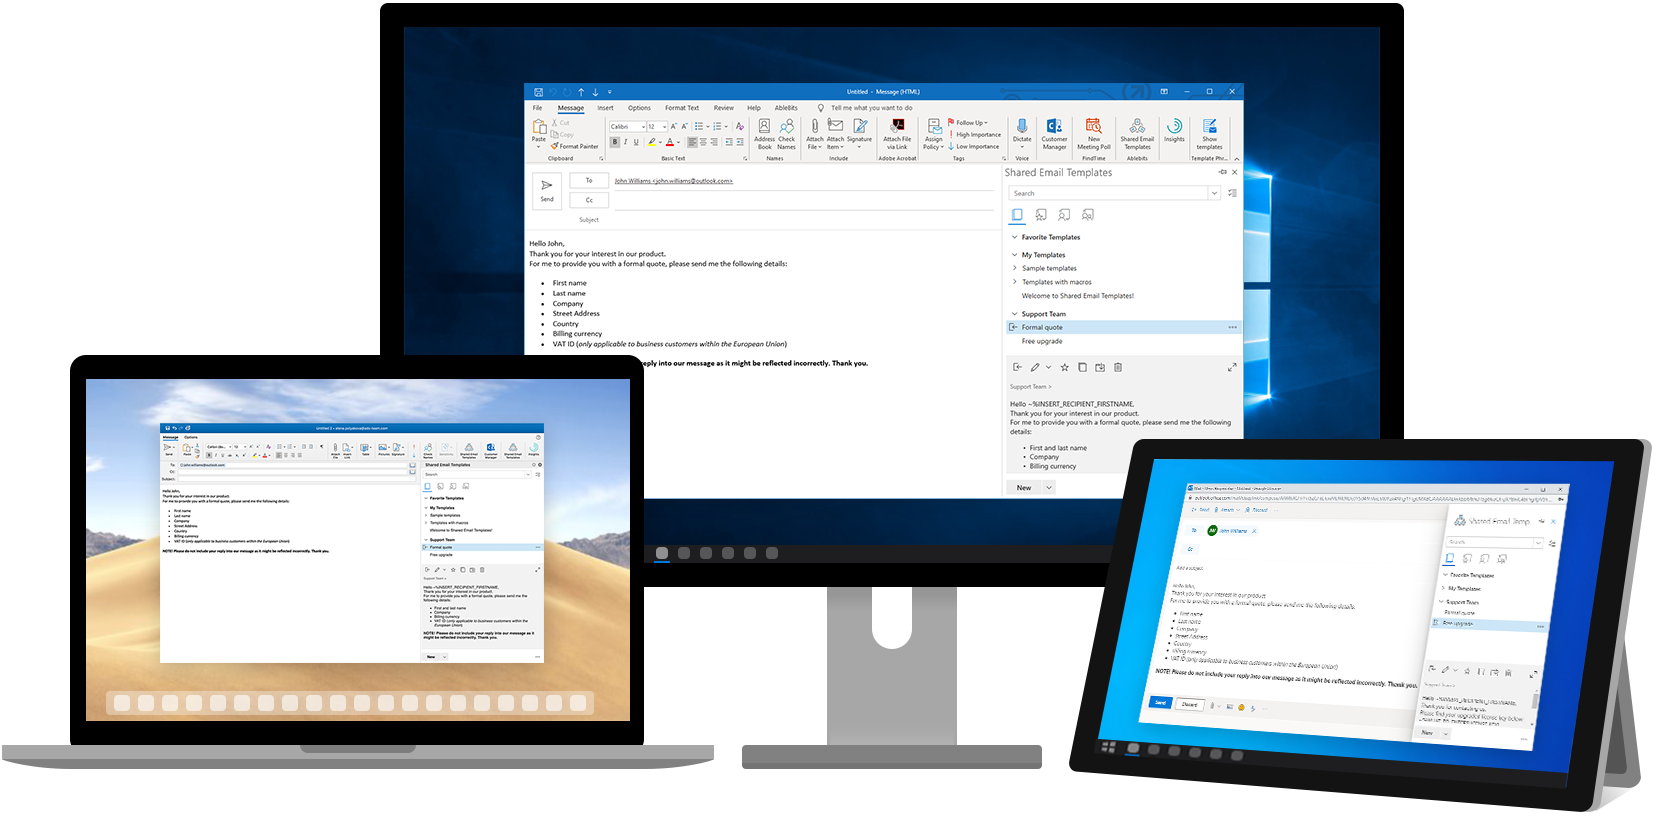 Shared Email Templates for Outlook on Windows, Mac and Outlook on the web